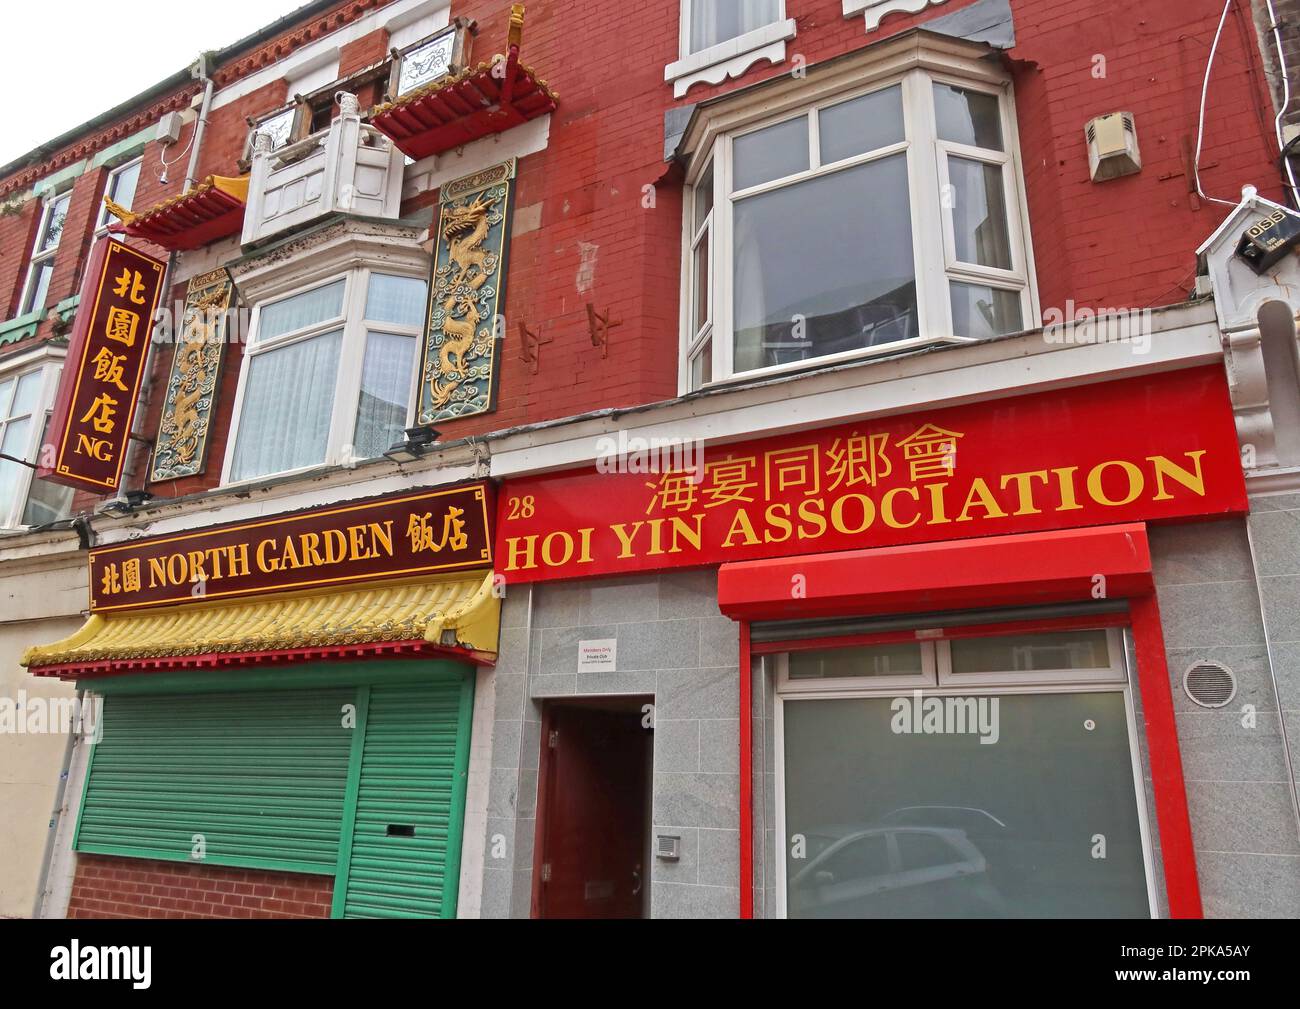 Chinatown Liverpool - Hoi Yin Association & North Garden Restaurant chinois, 28 Nelson St, Liverpool, Merseyside, Angleterre, ROYAUME-UNI, L1 5DN Banque D'Images